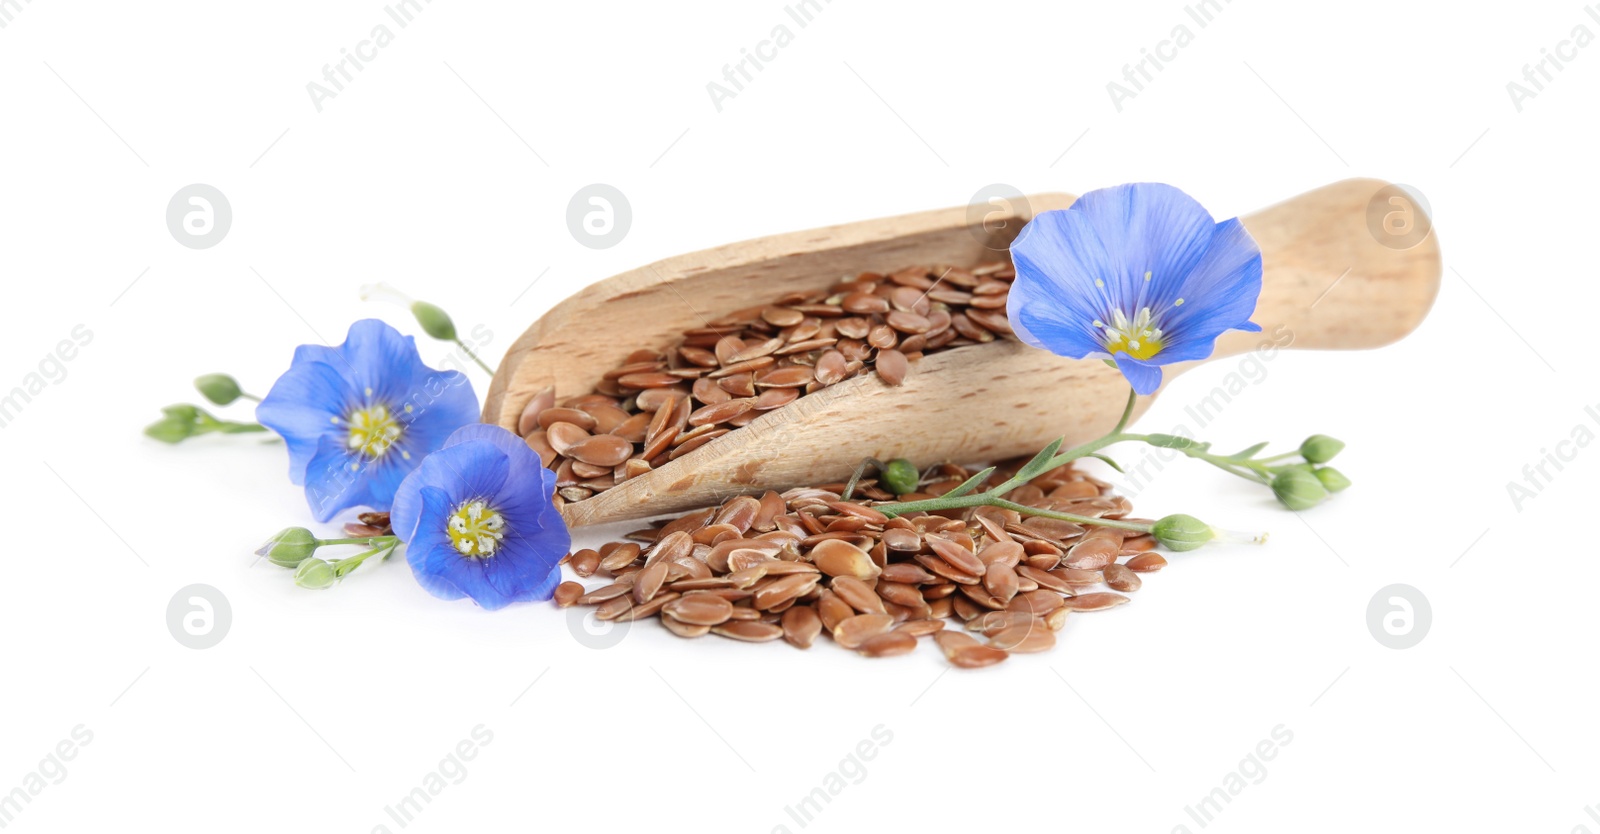 Photo of Wooden scoop with flax flowers and seeds on white background